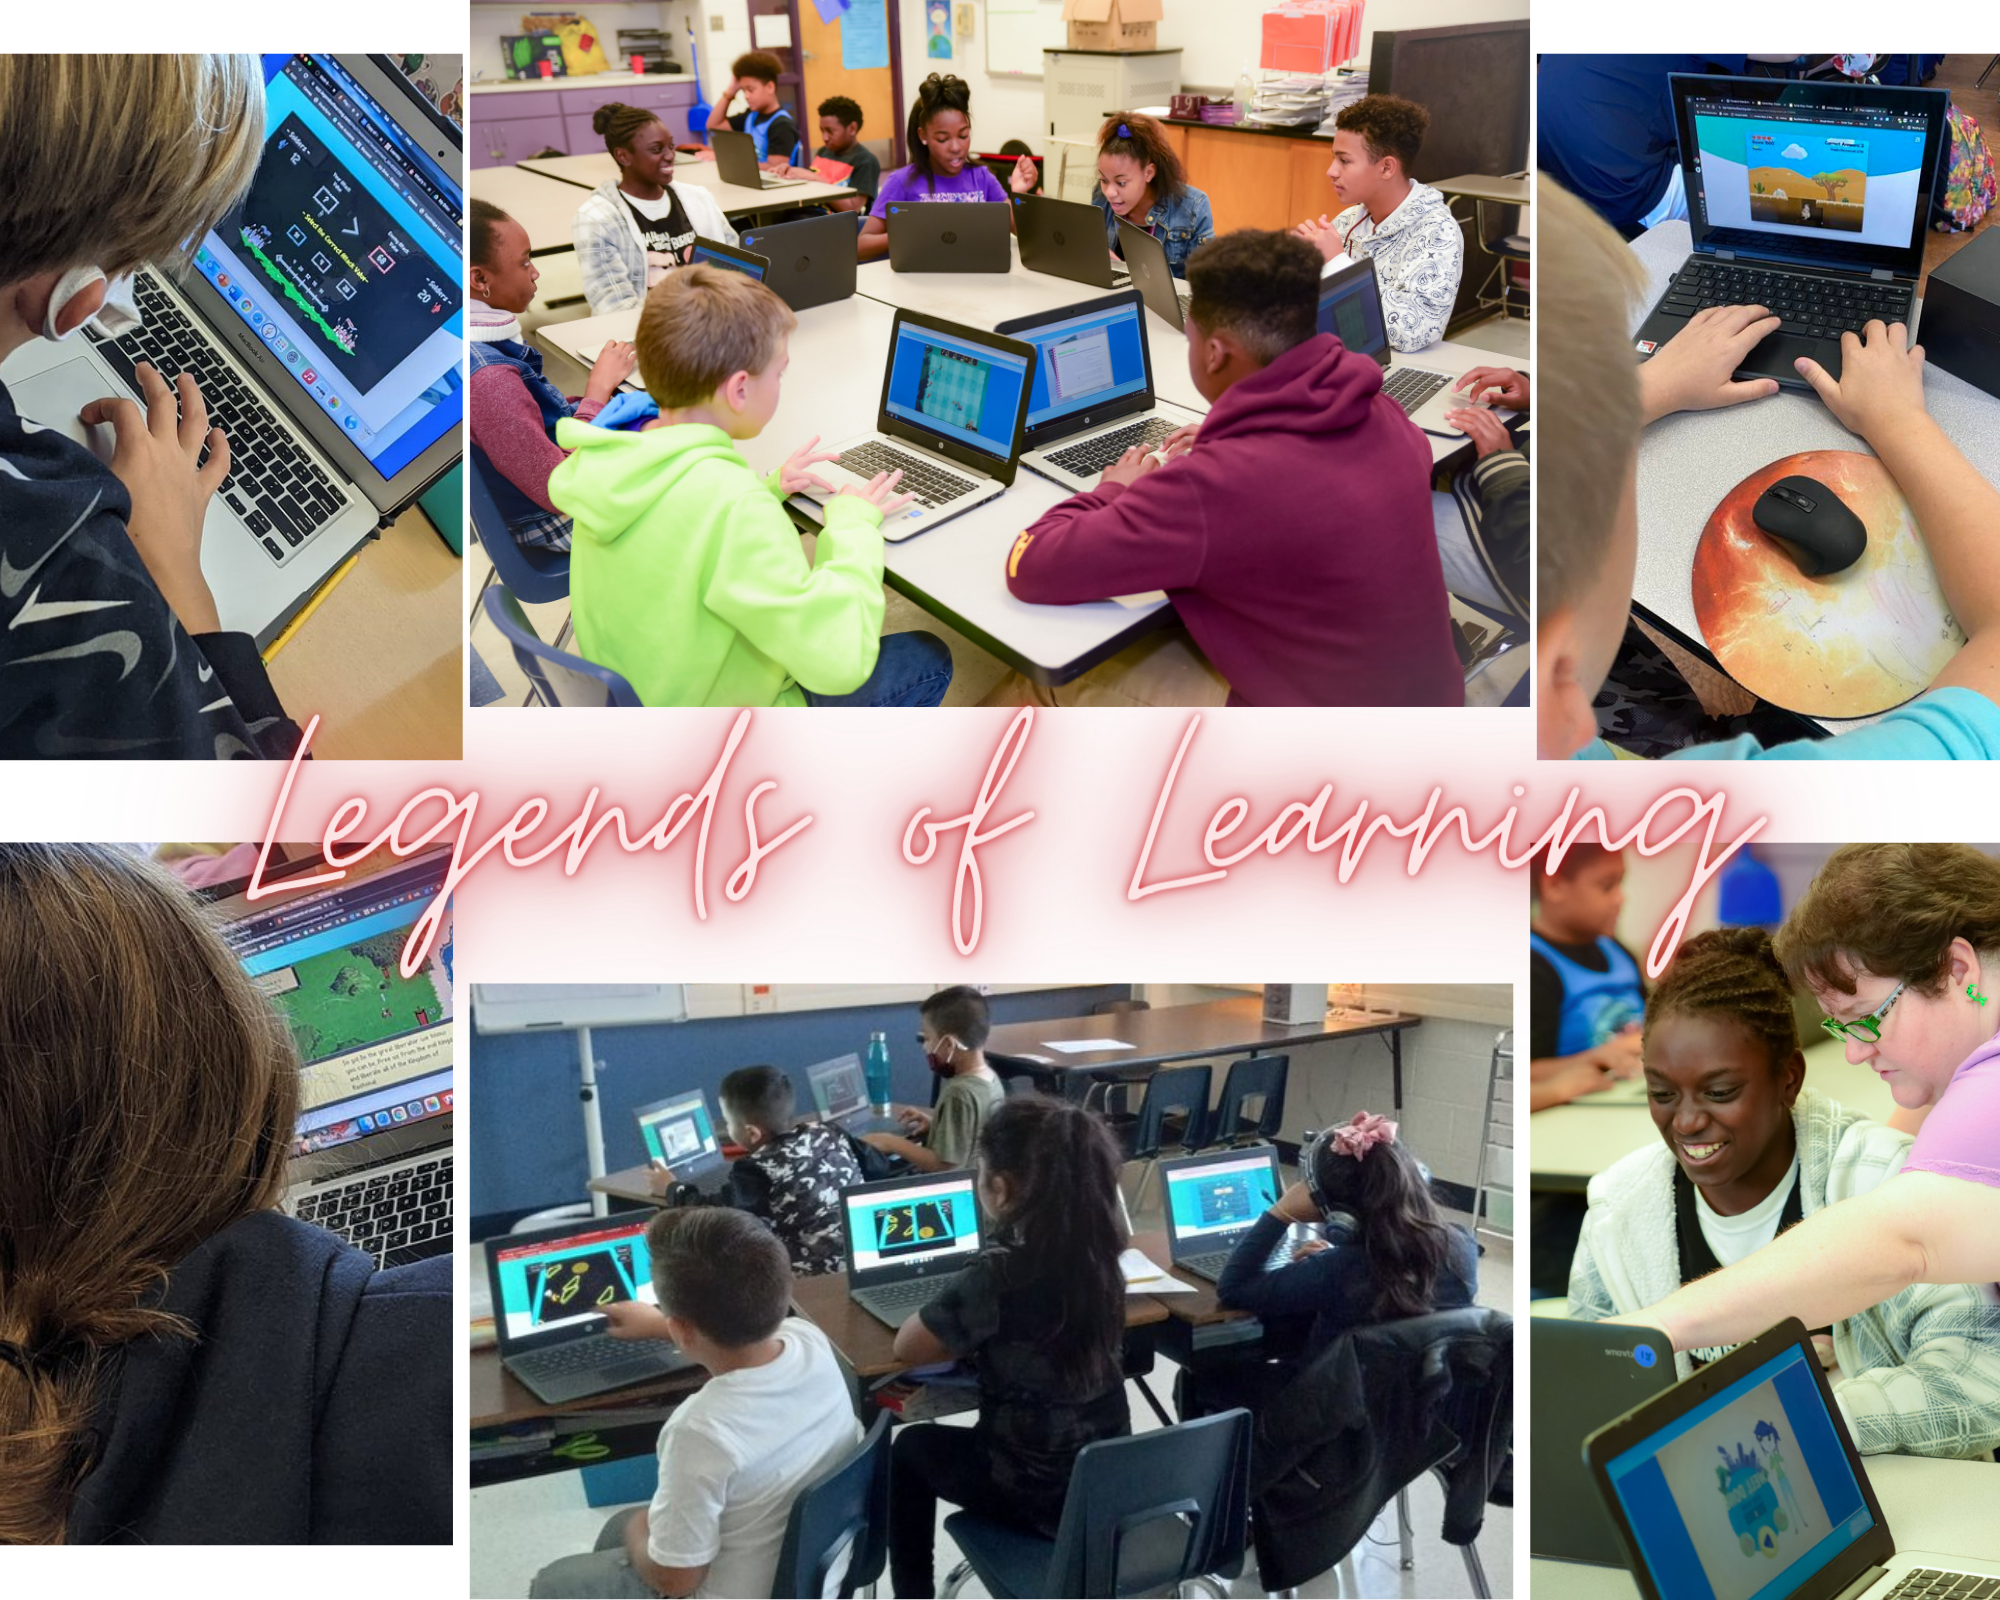 Checking in with Legends of Learning, the edtech startup providing games for  teachers to assign 